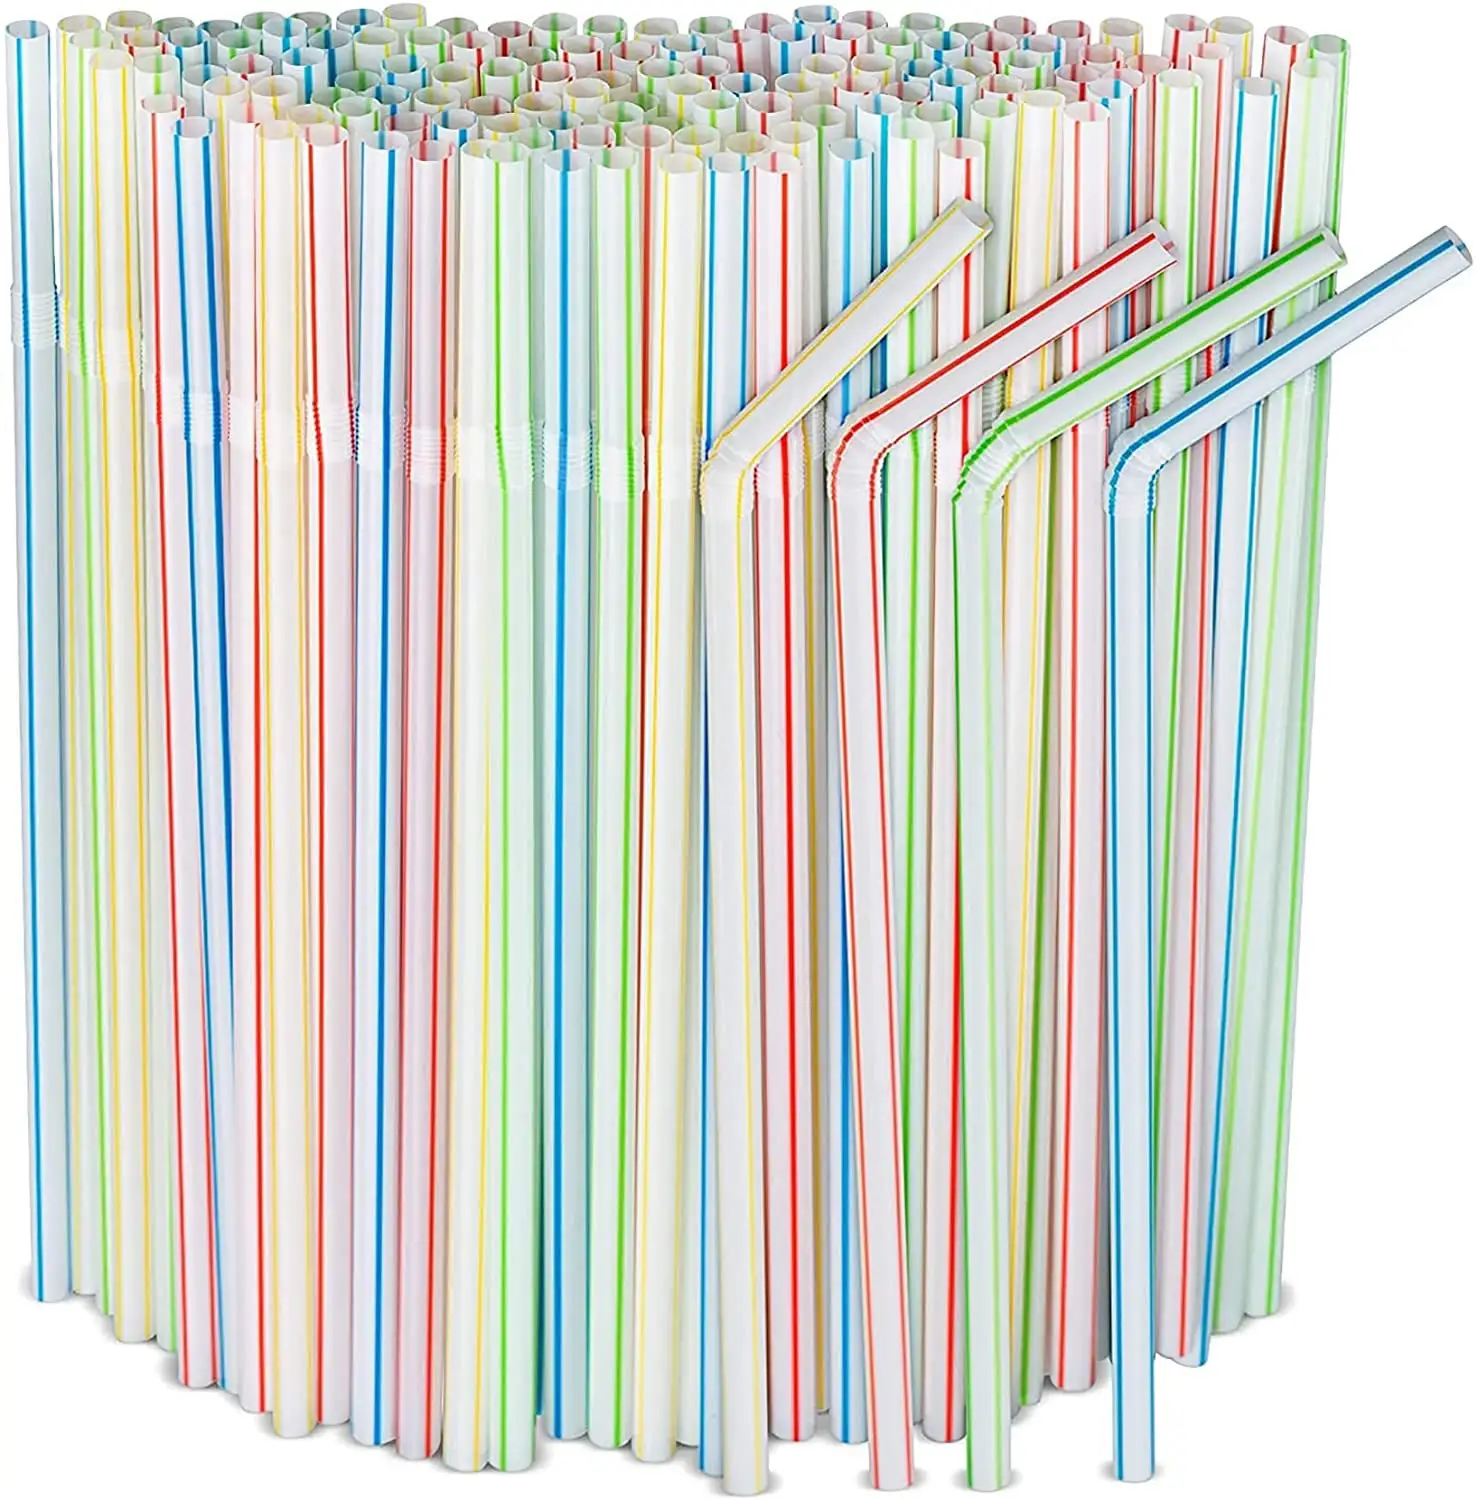 Plastic Drinking Straws Flexible straws 8" Long Stripes Multiple Colors Straws suitable for various drinks, juice, milk